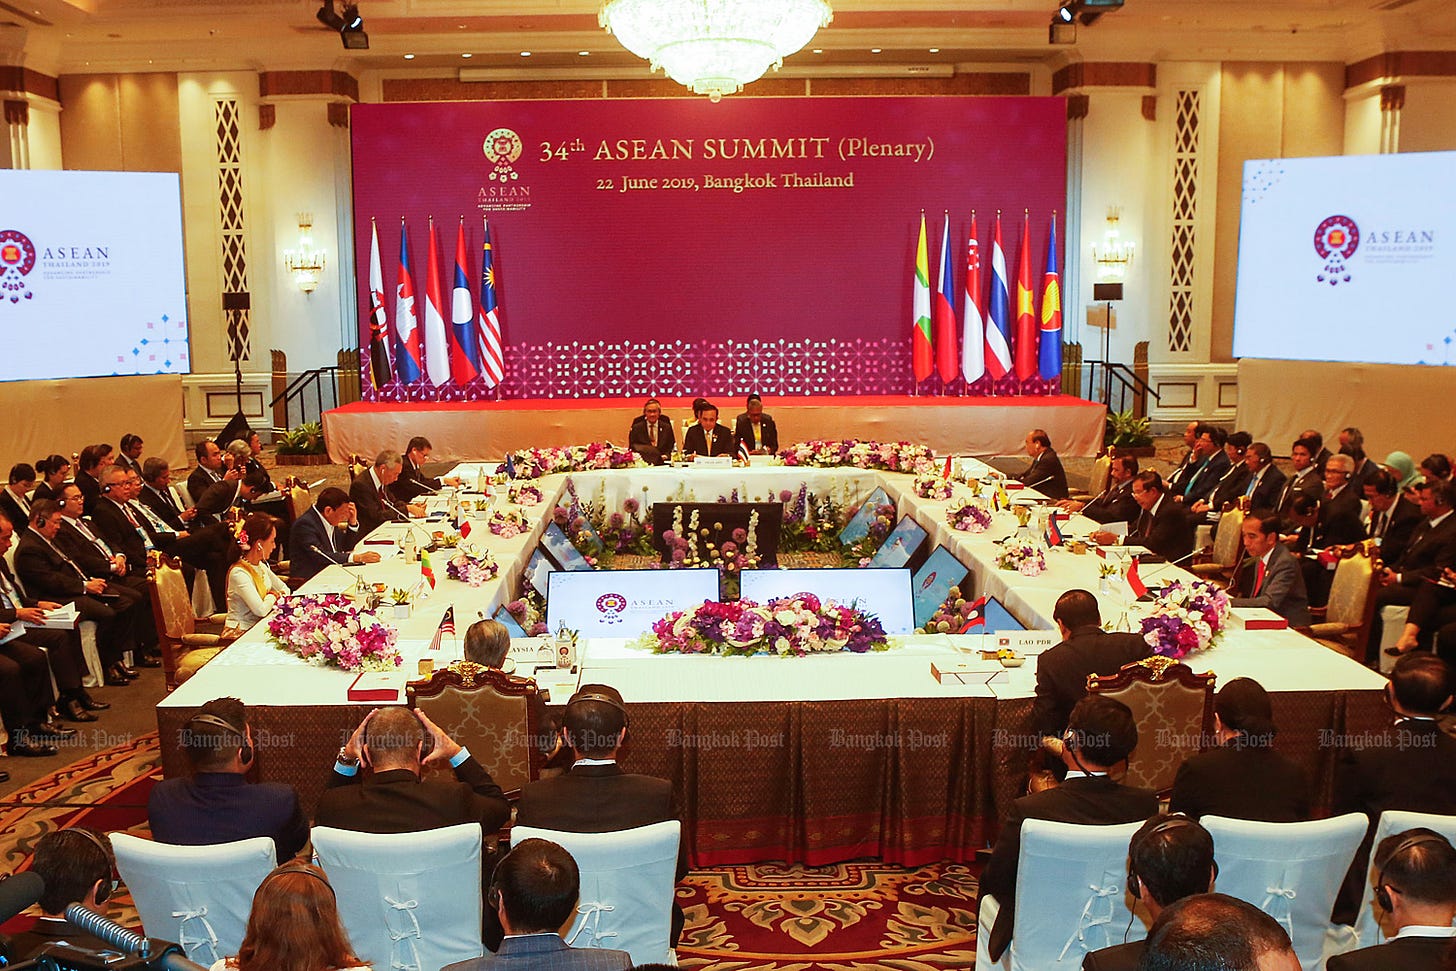 Prime Minister Prayut Chan-o-cha chairs the plenary session of the Asean summit at the Athenee Hotel in Bangkok on Saturday. (Photo by Pattarapong Chatpattarasill)